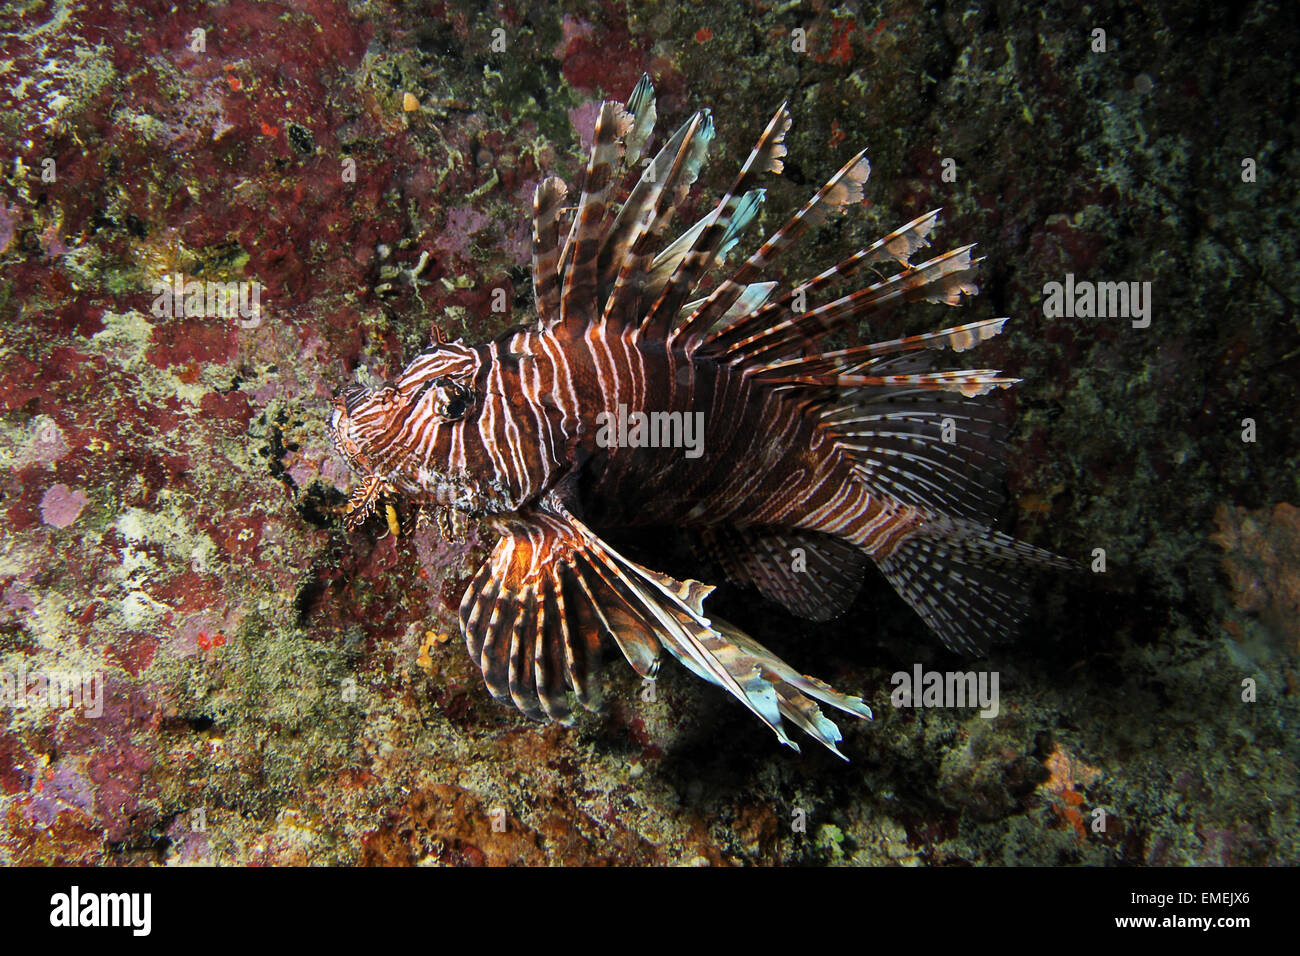 A beautiful but invasive Lionfish of the species Pterois miles. Photographed on the coral reefs of Curacao,Dutch Caribbean. Stock Photo